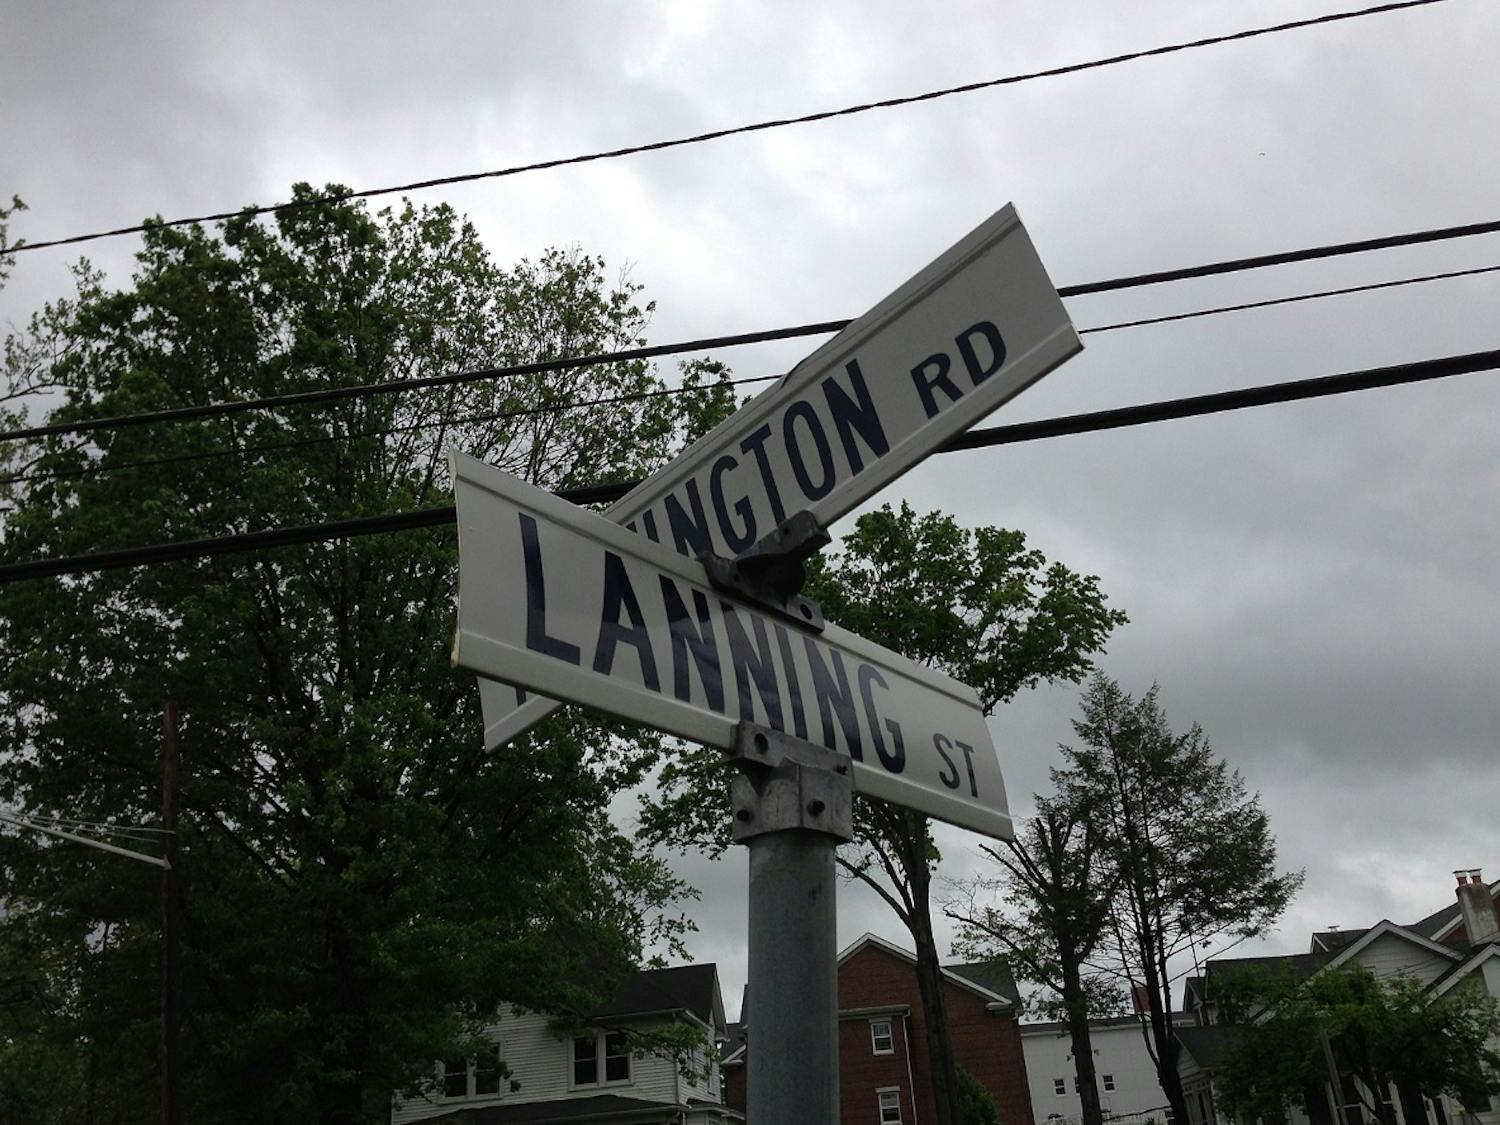 Signs at the intersection of Pennington Road and Langington Street in Ewing, New Jersey. Photograph taken on May 26, 2014 (Photo courtesy of user Famartin / Wikimedia Commons).